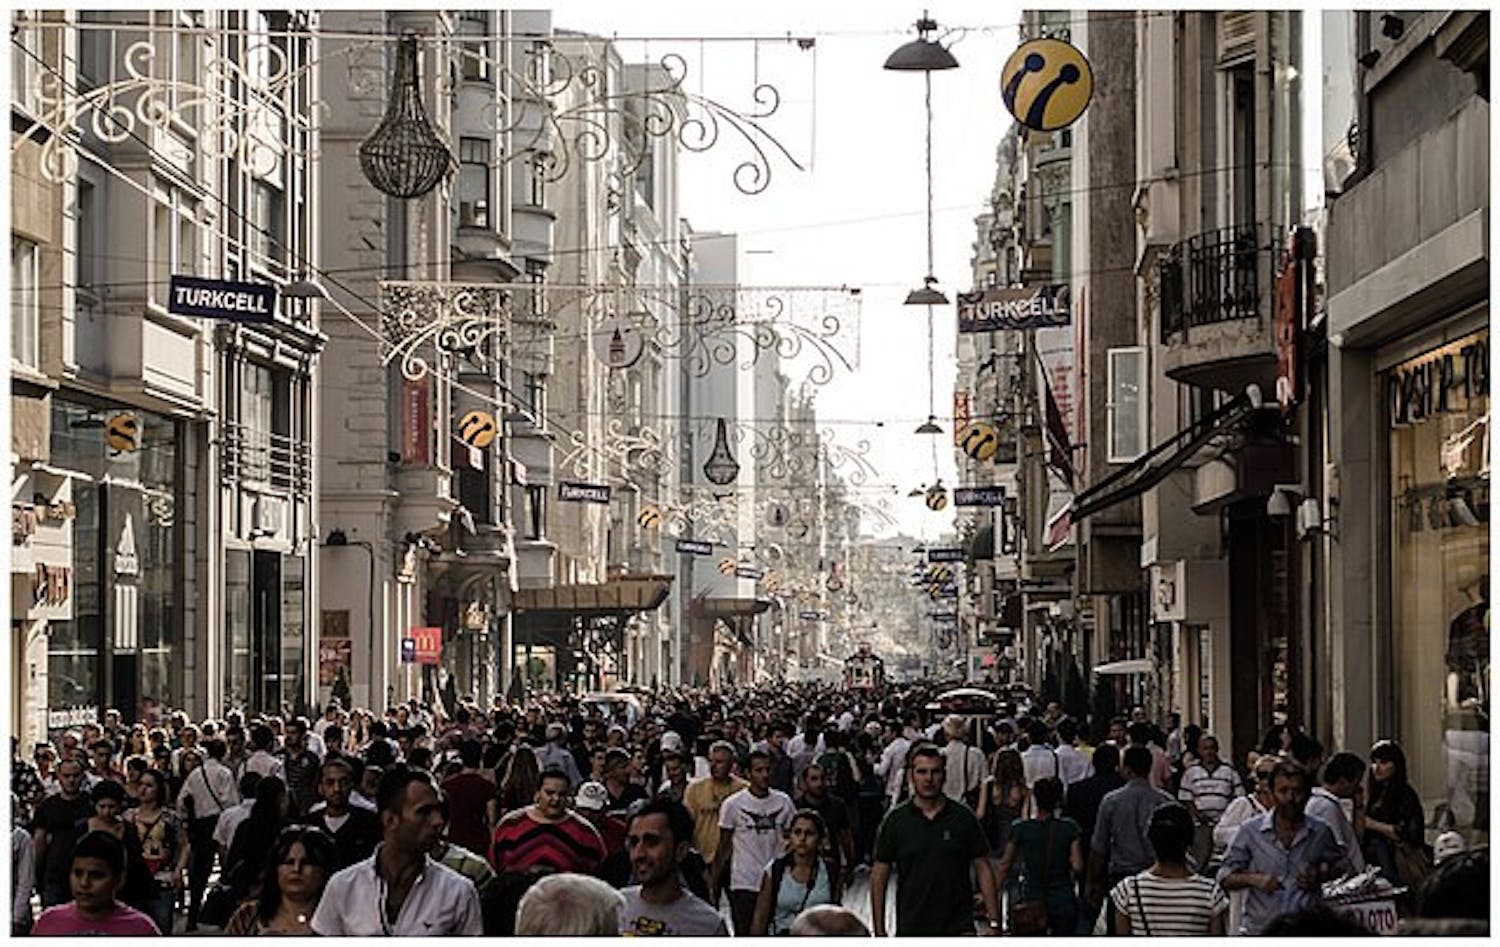 640px-Istiklal_Avenue_Istanbul_8109202351